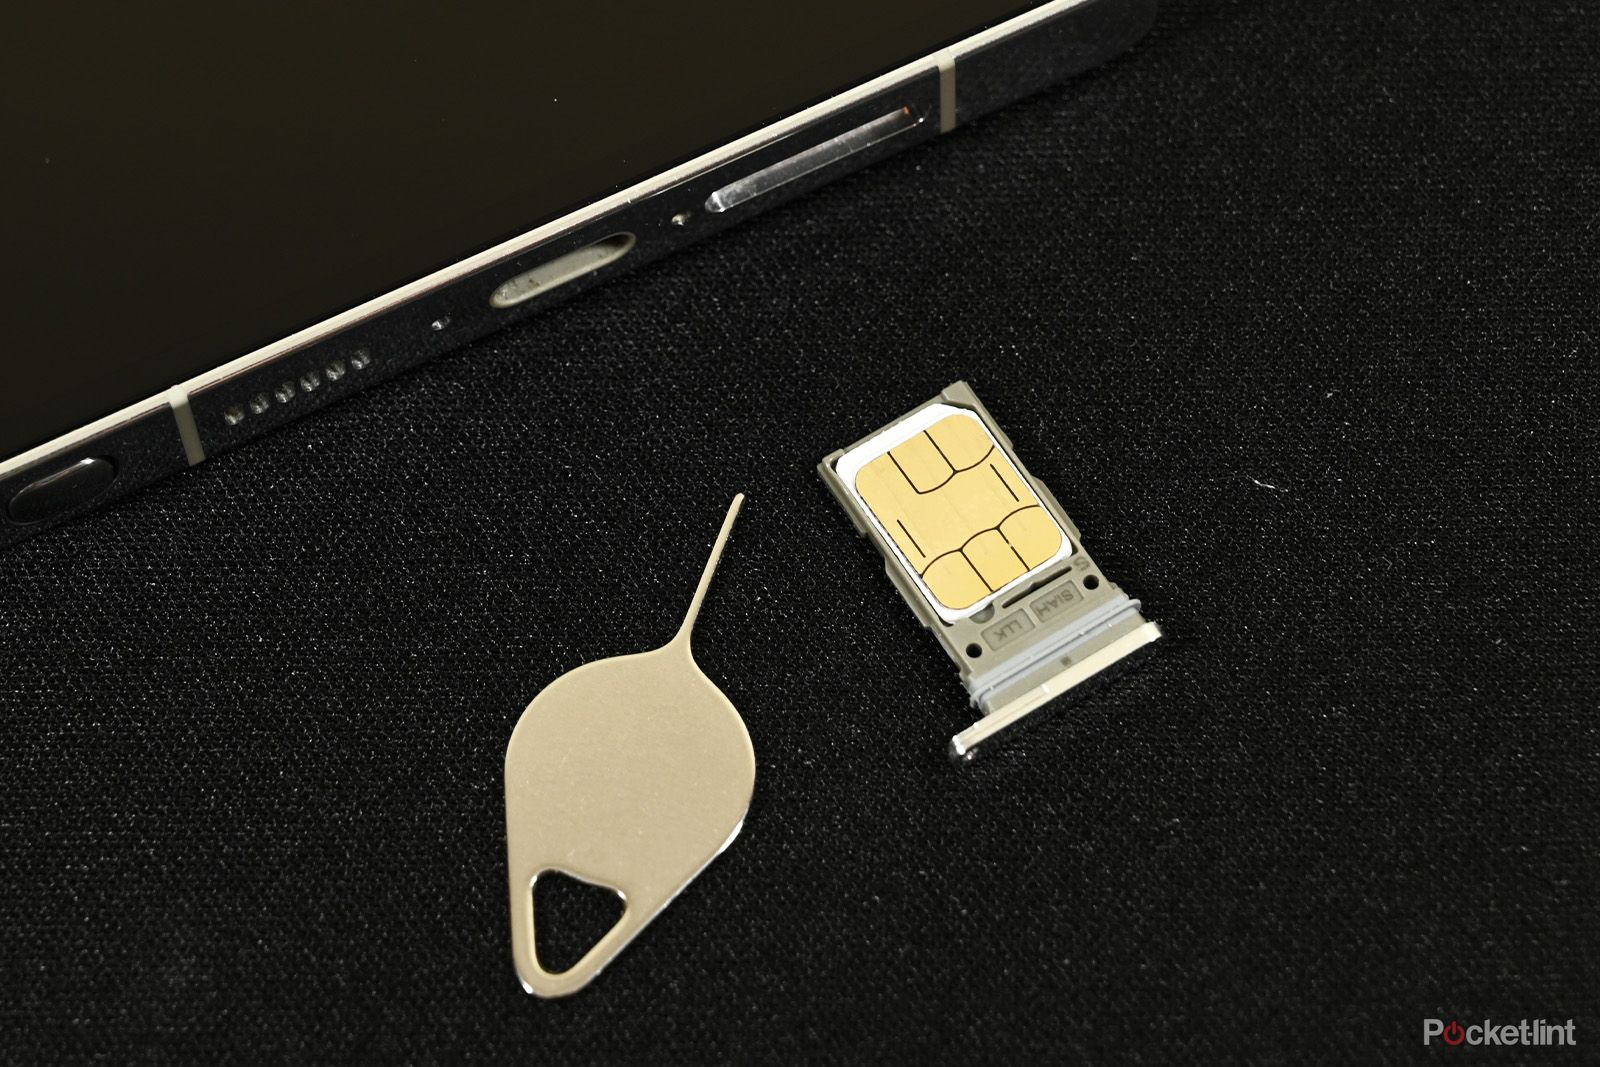 How to insert or remove a SIM card on most phones